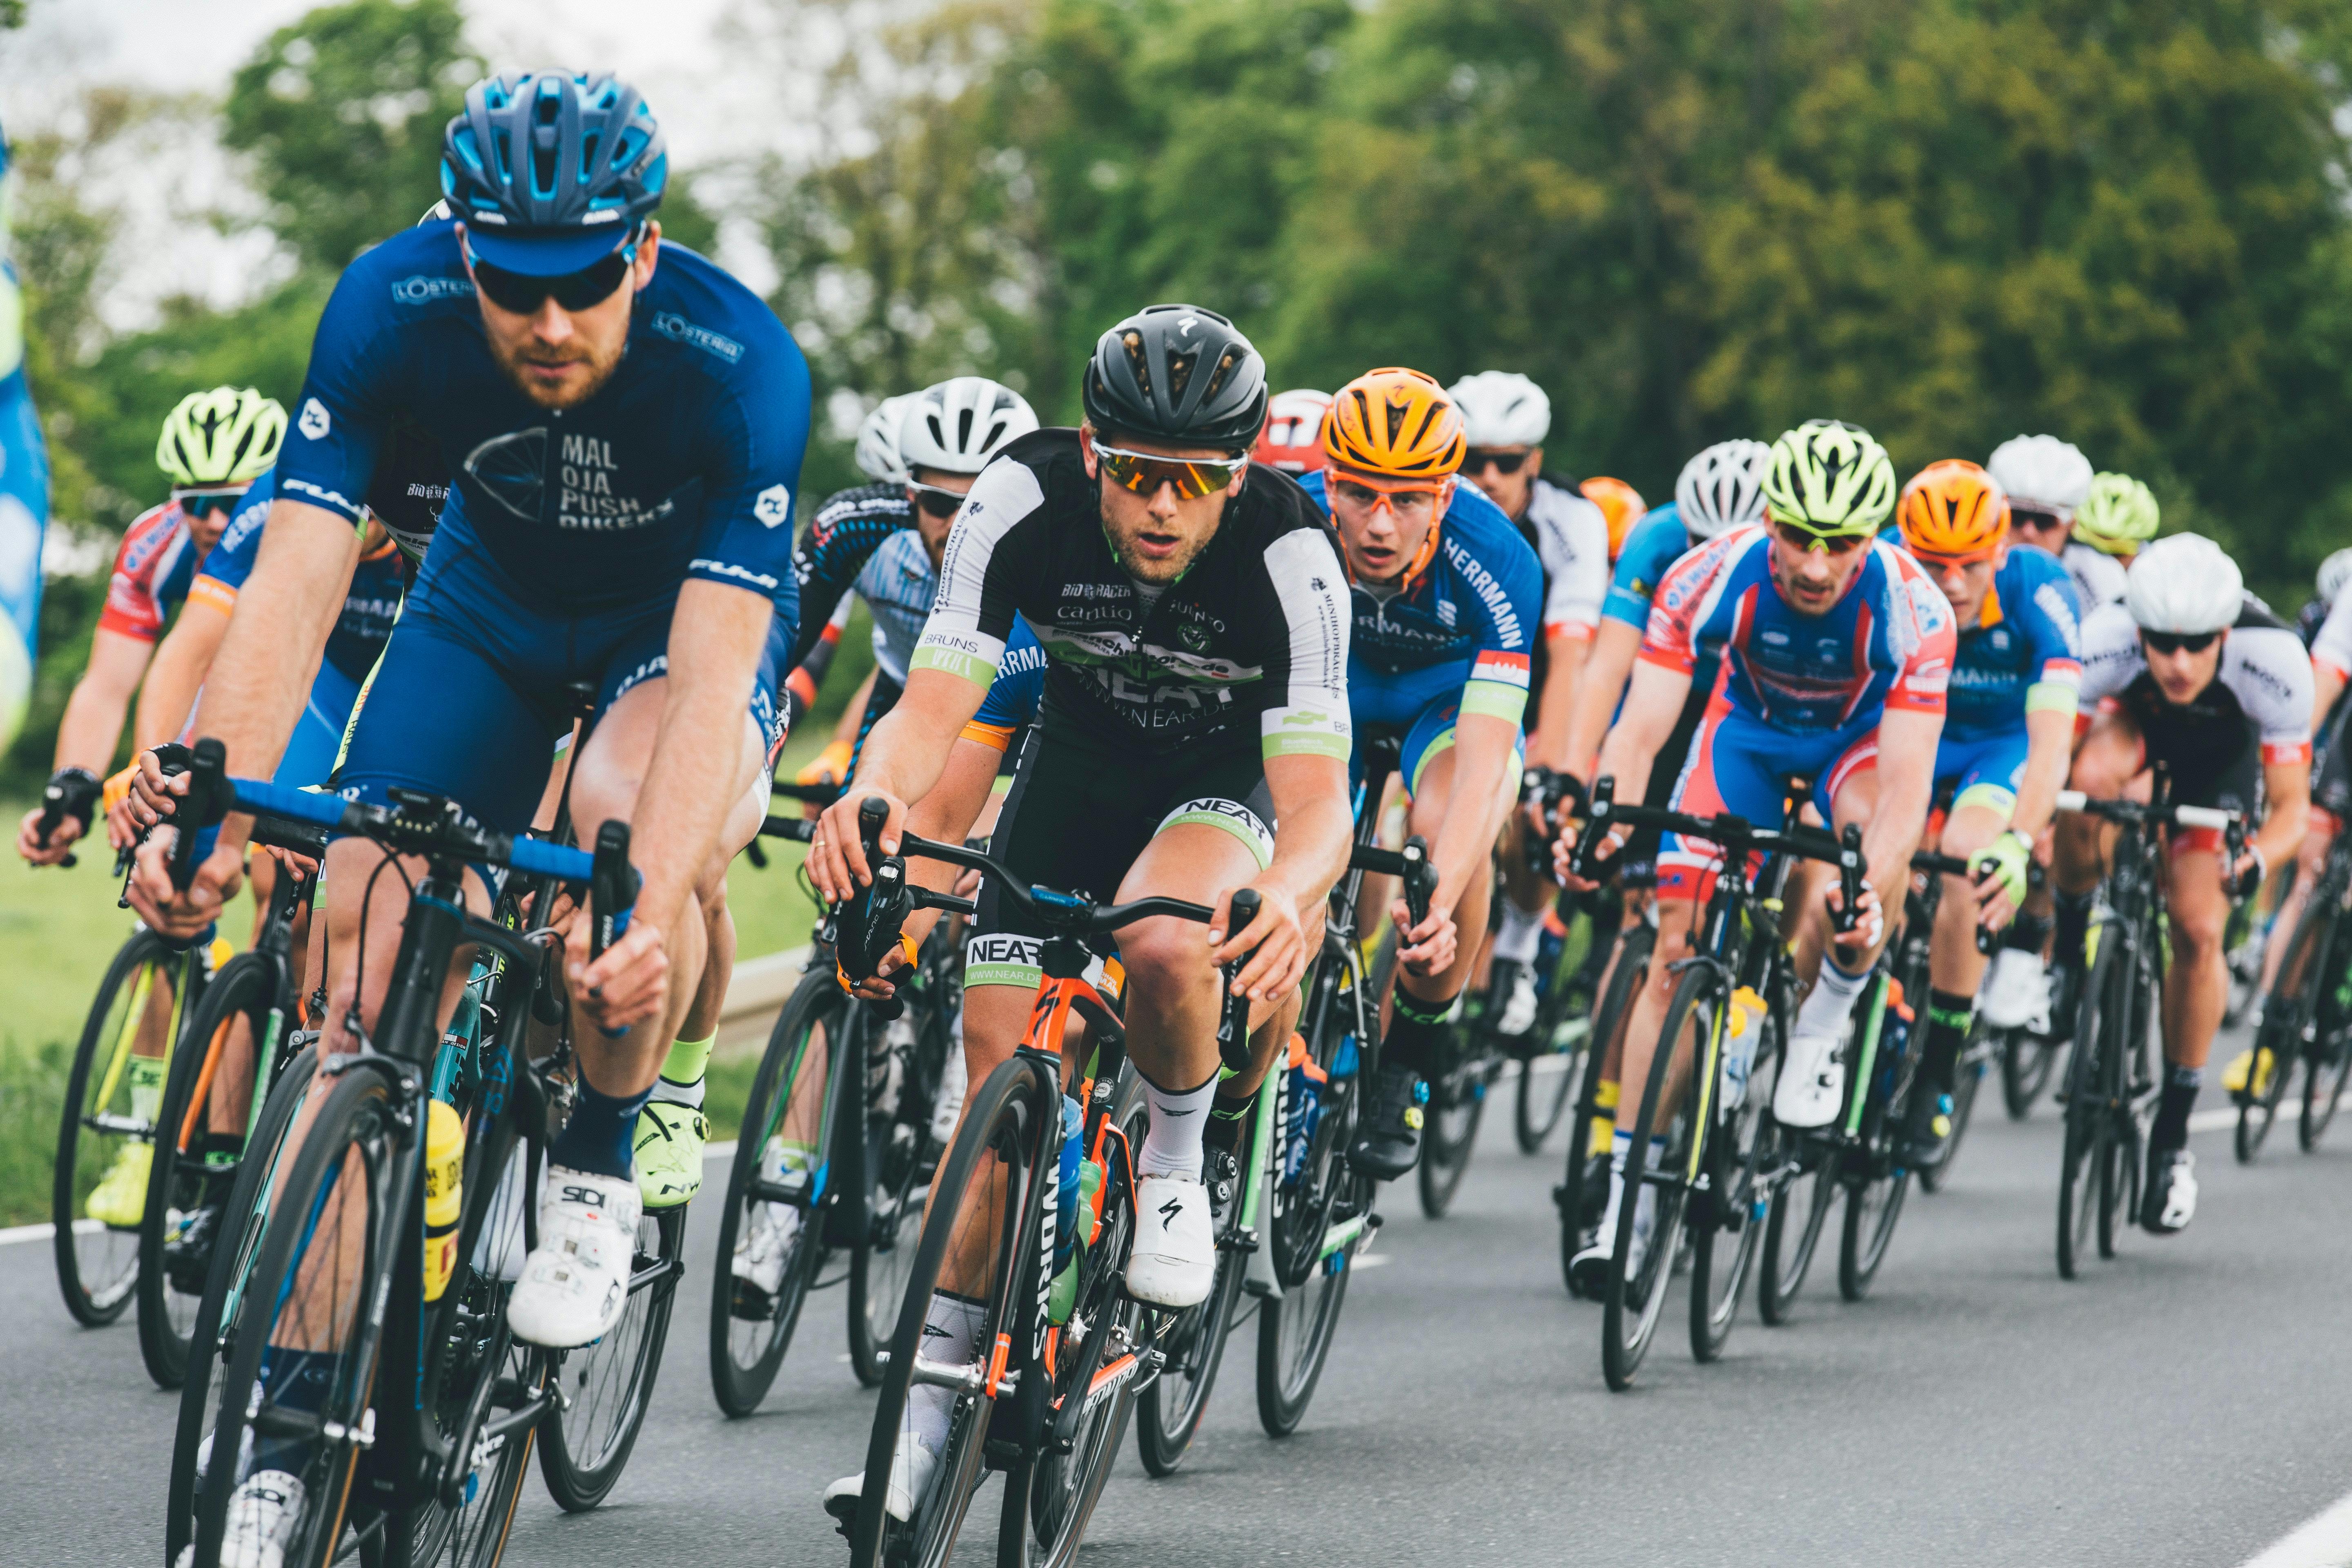 A group of road cyclists racing together in a peloton.